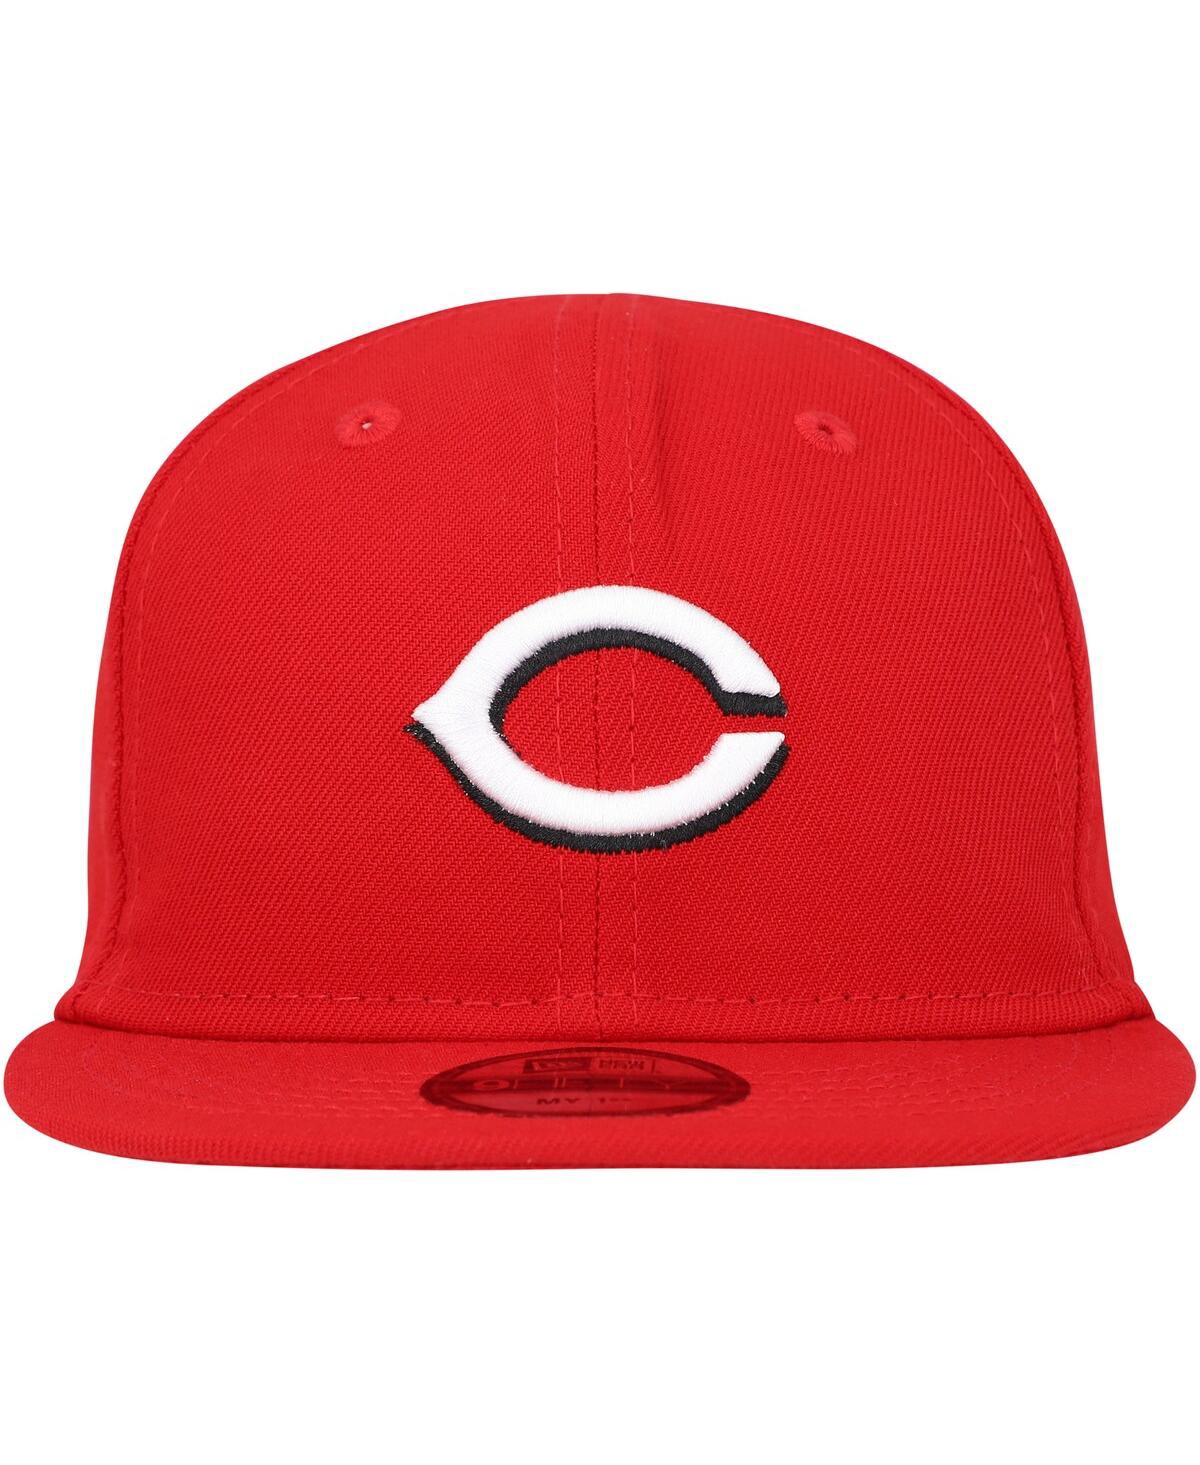 Shop New Era Infant Boys And Girls  Red Cincinnati Reds My First 9fifty Adjustable Hat